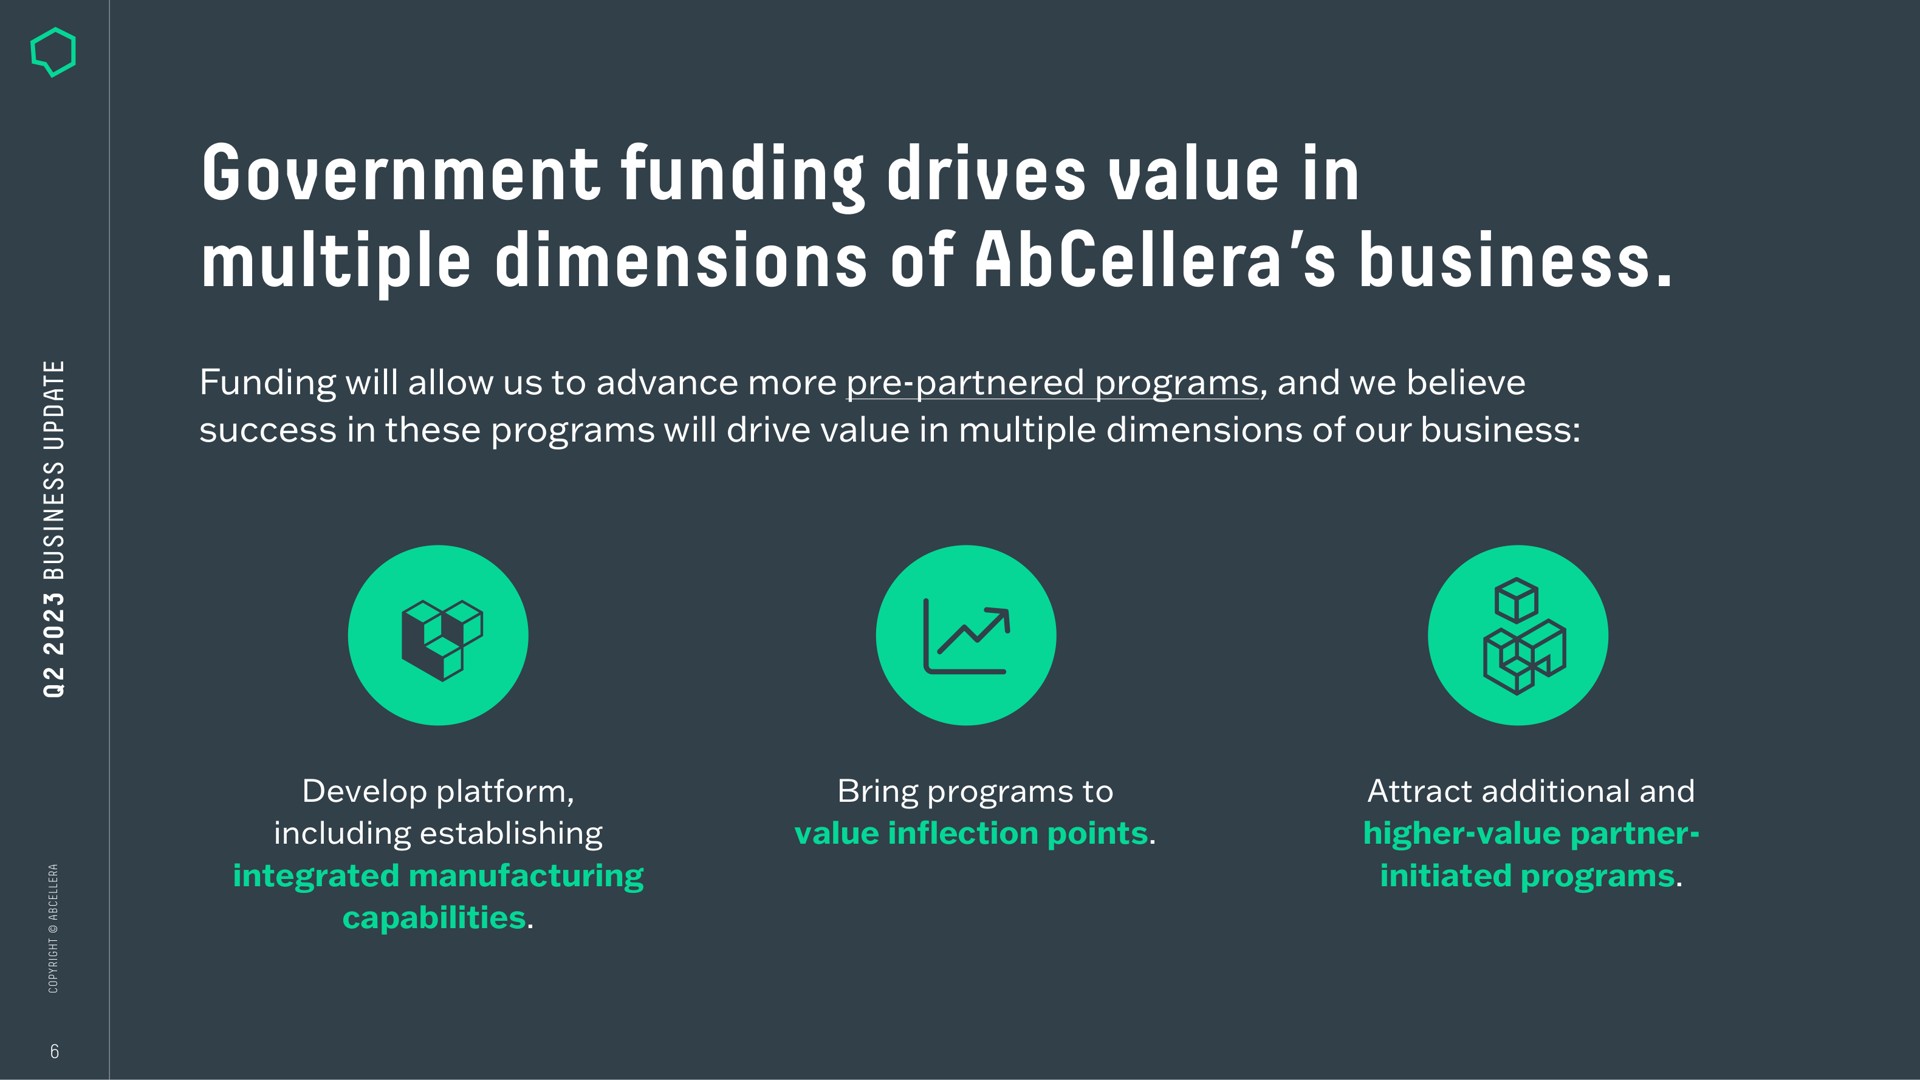 government funding drives value in multiple dimensions of business | AbCellera